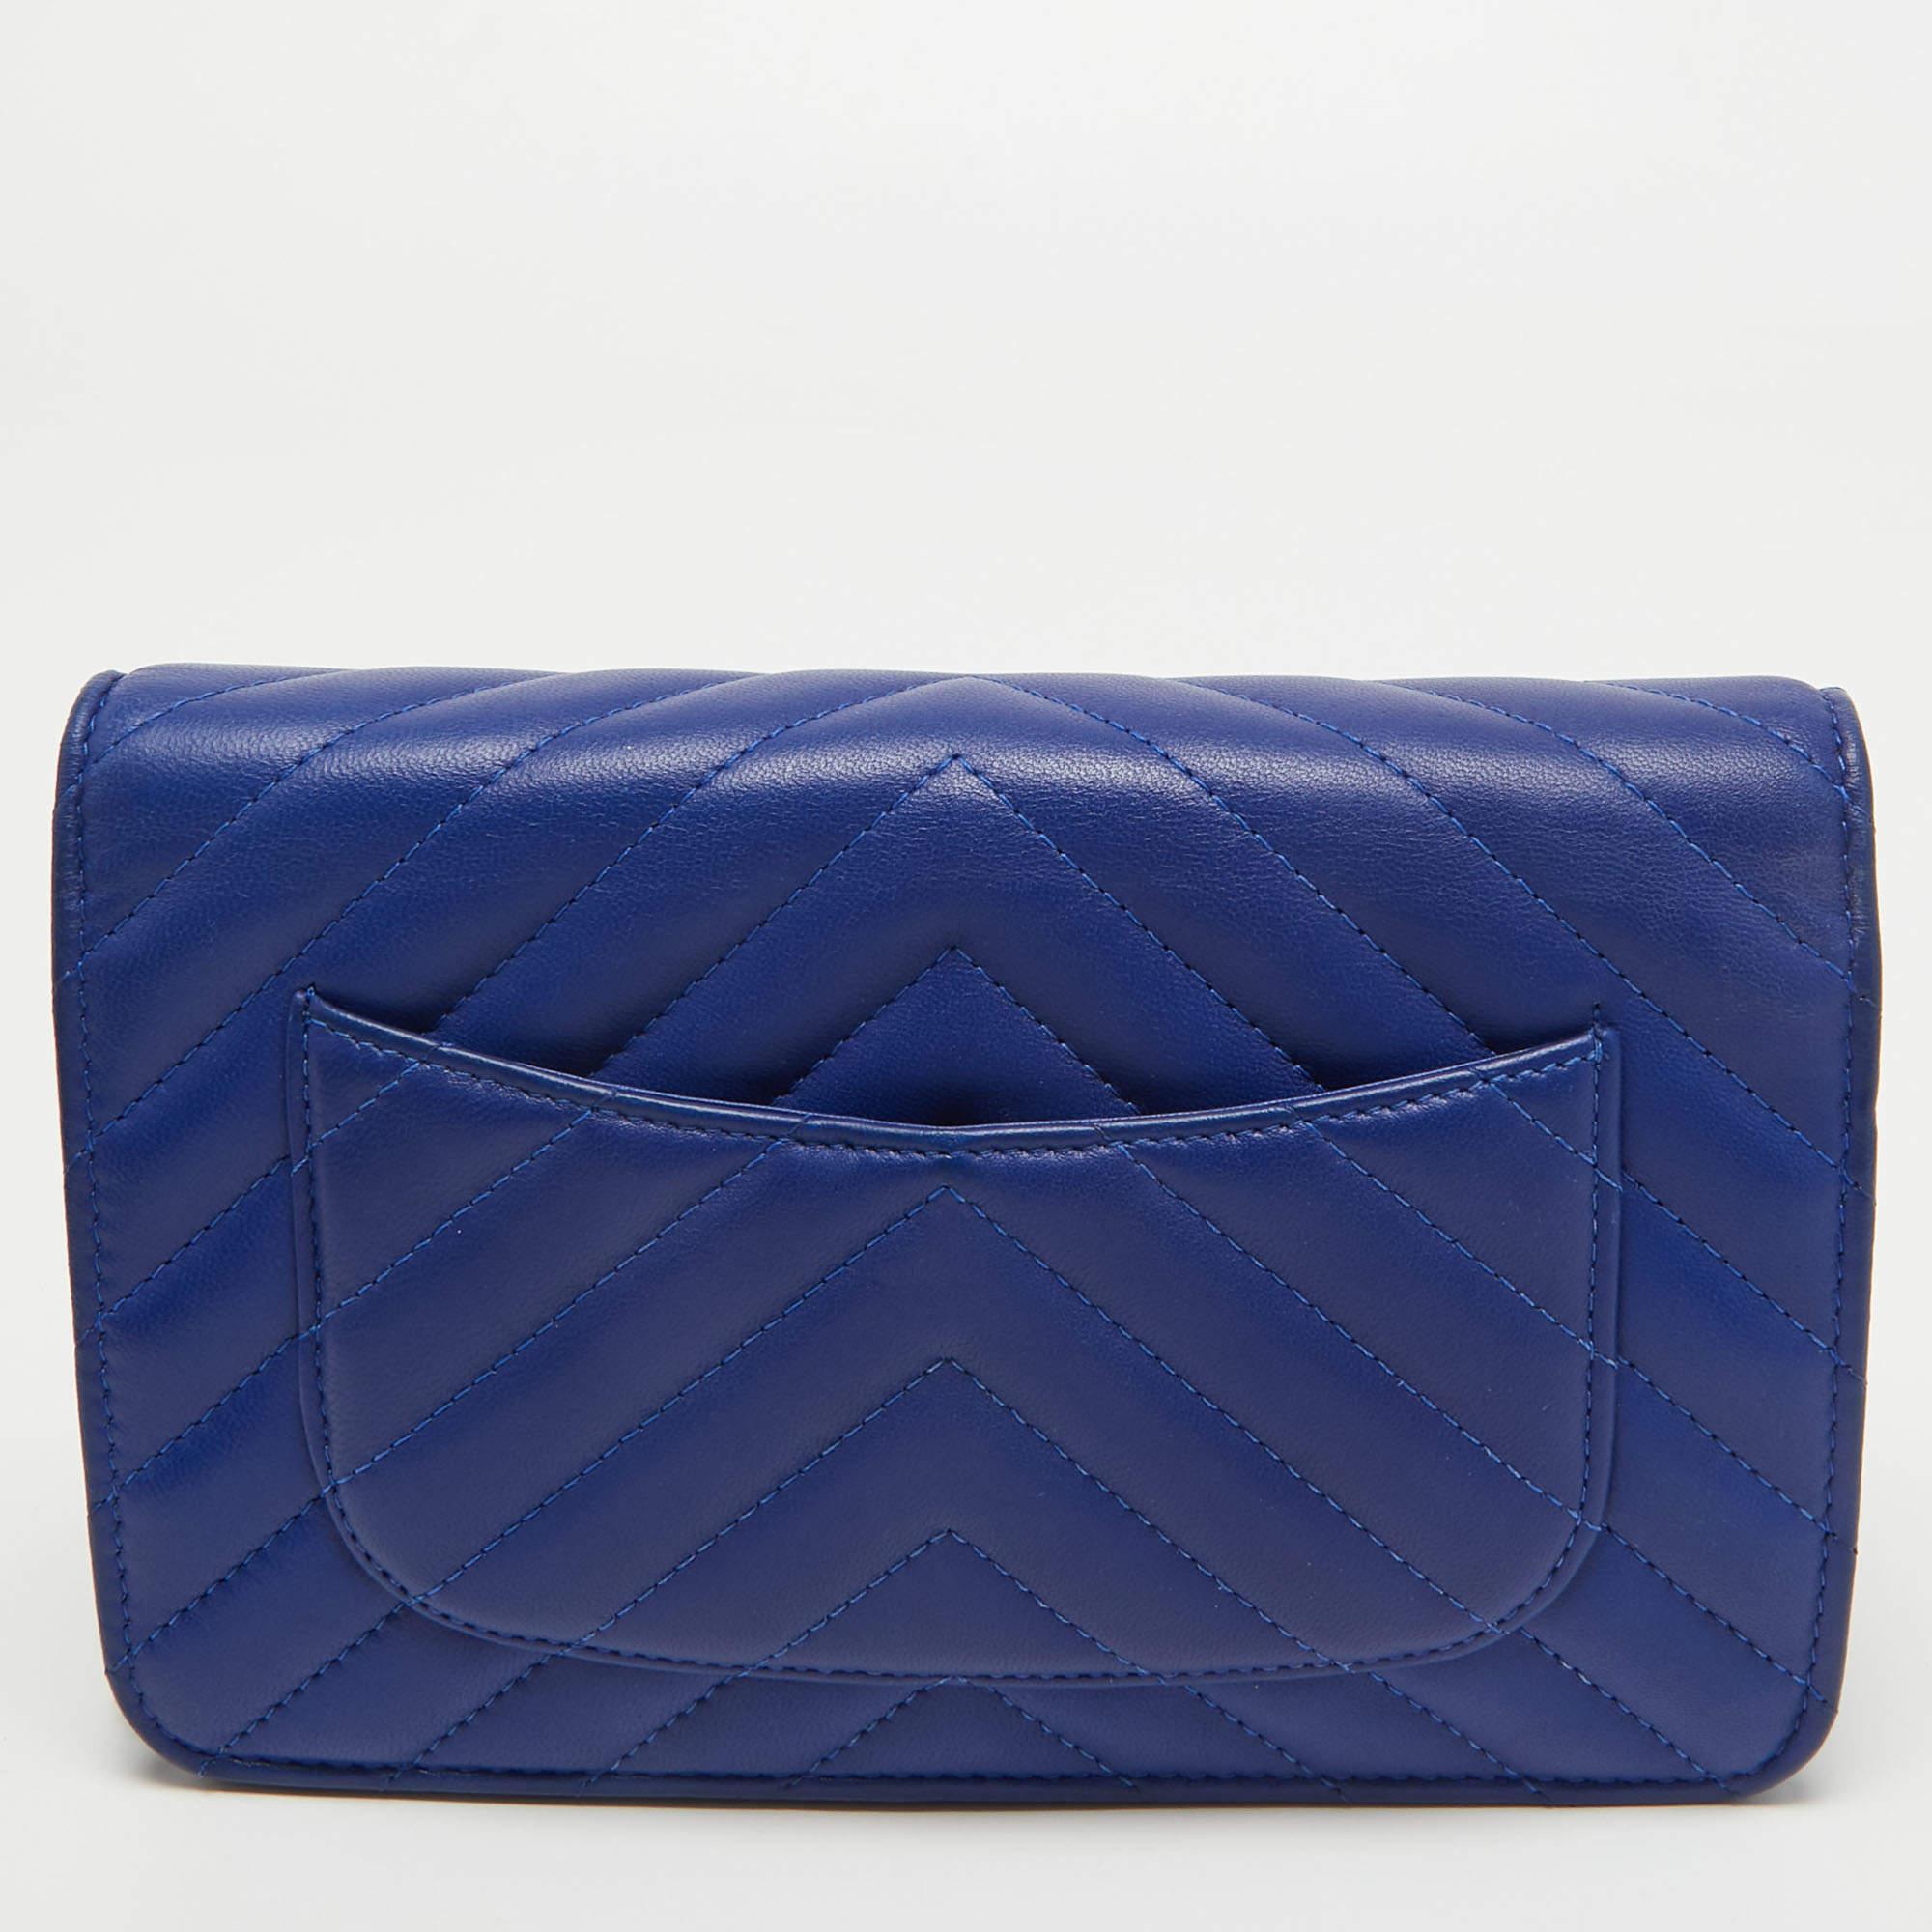 Trust this Chanel WOC to be light, durable, and comfortable to carry. Crafted from leather, it comes in a blue shade. It features a fabric interior, a long strap, and a logo at the front.

Includes: Original Dustbag

